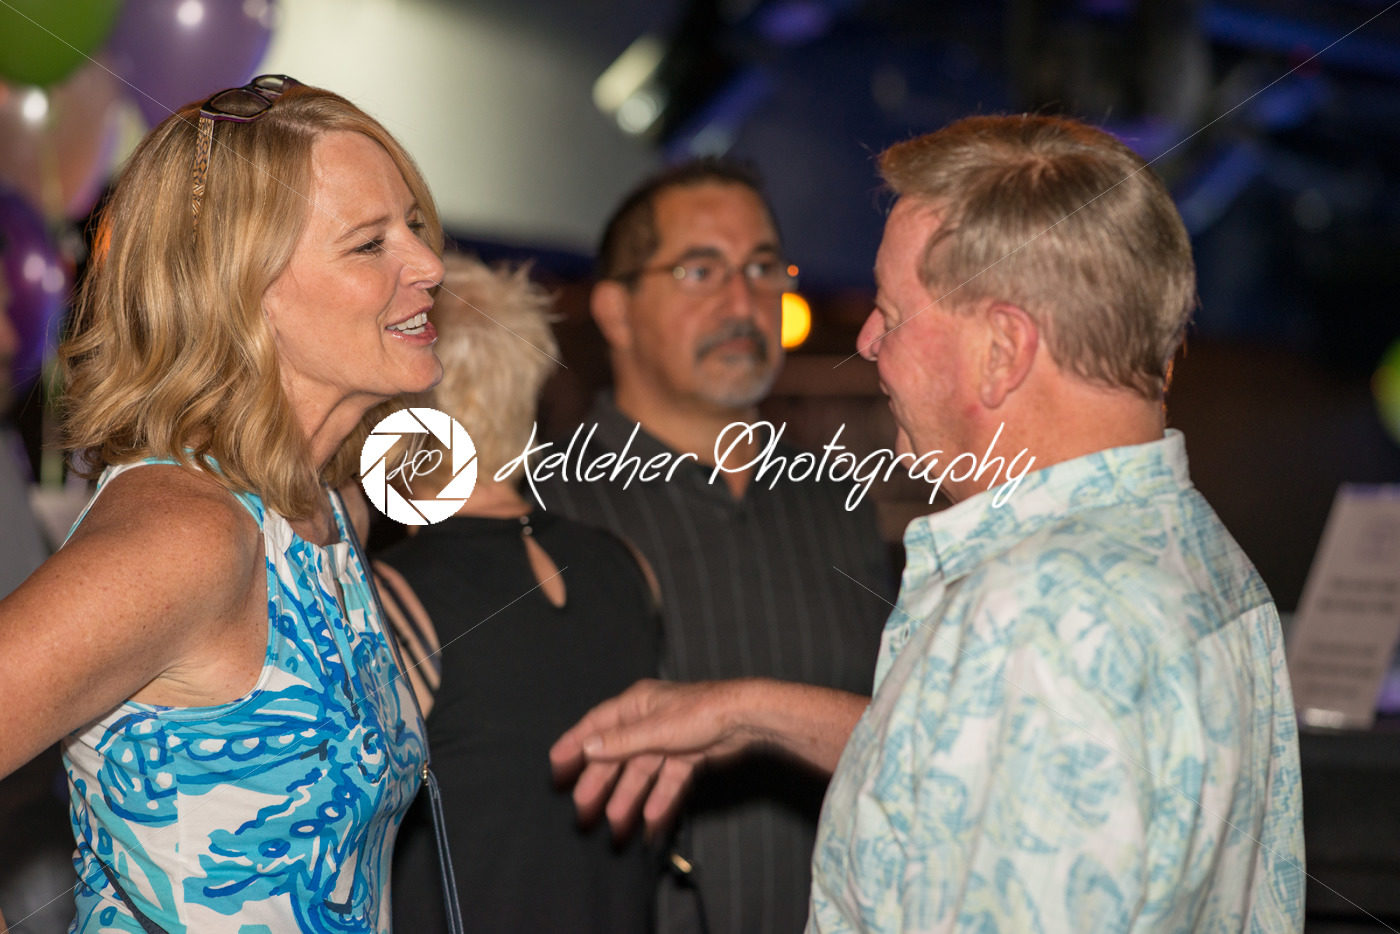 VALLEY FORGE CASINO, KING OF PRUSSIA, PA – JUKY 15: Leslie Gudel at Kendall’s Crusade fundraising event on July 15, 2017 - Kelleher Photography Store